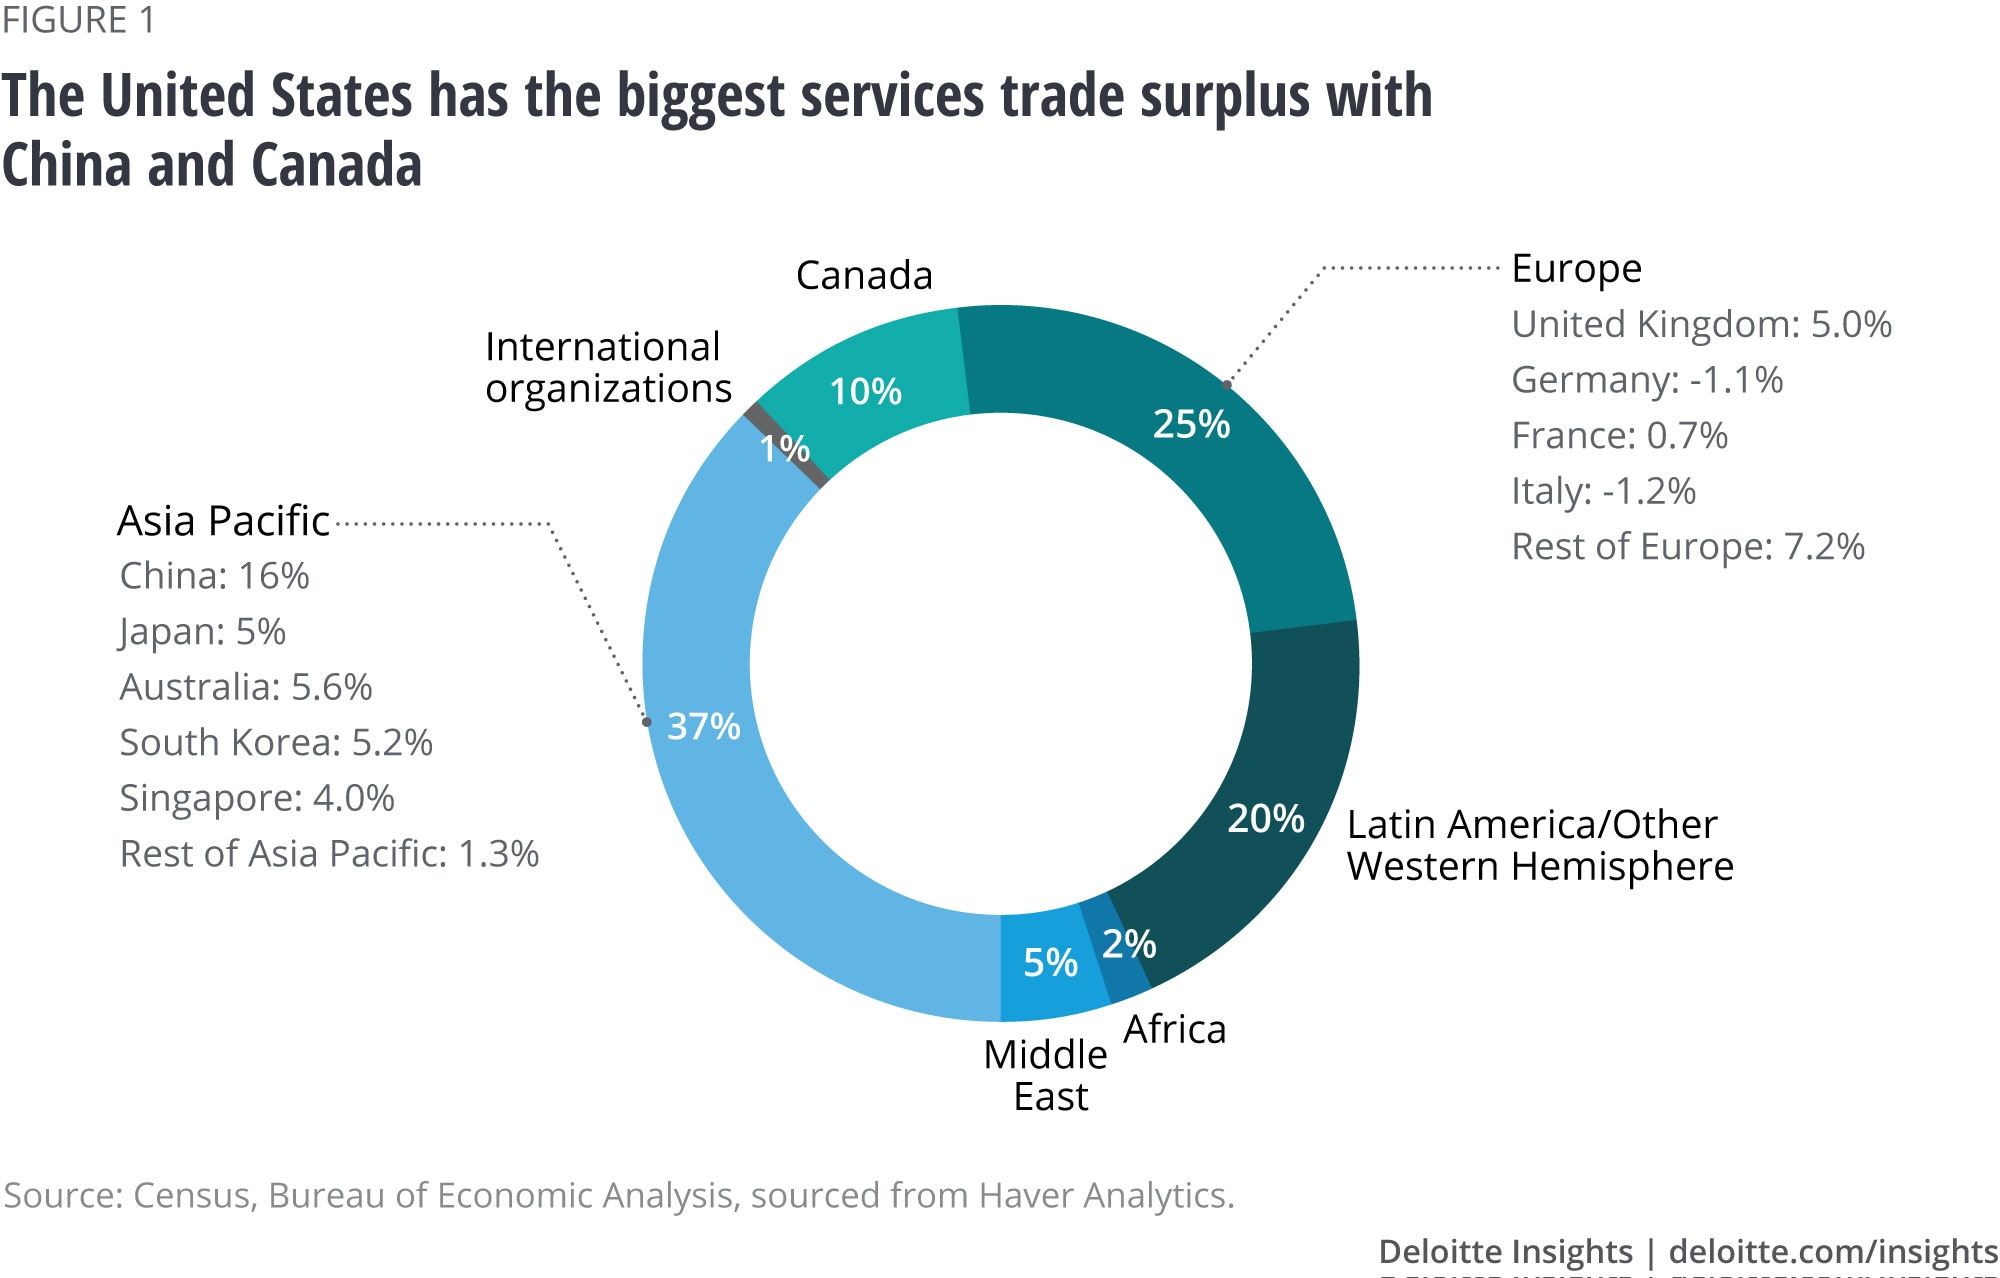 The United States has the biggest services’ trade surplus with China and Canada